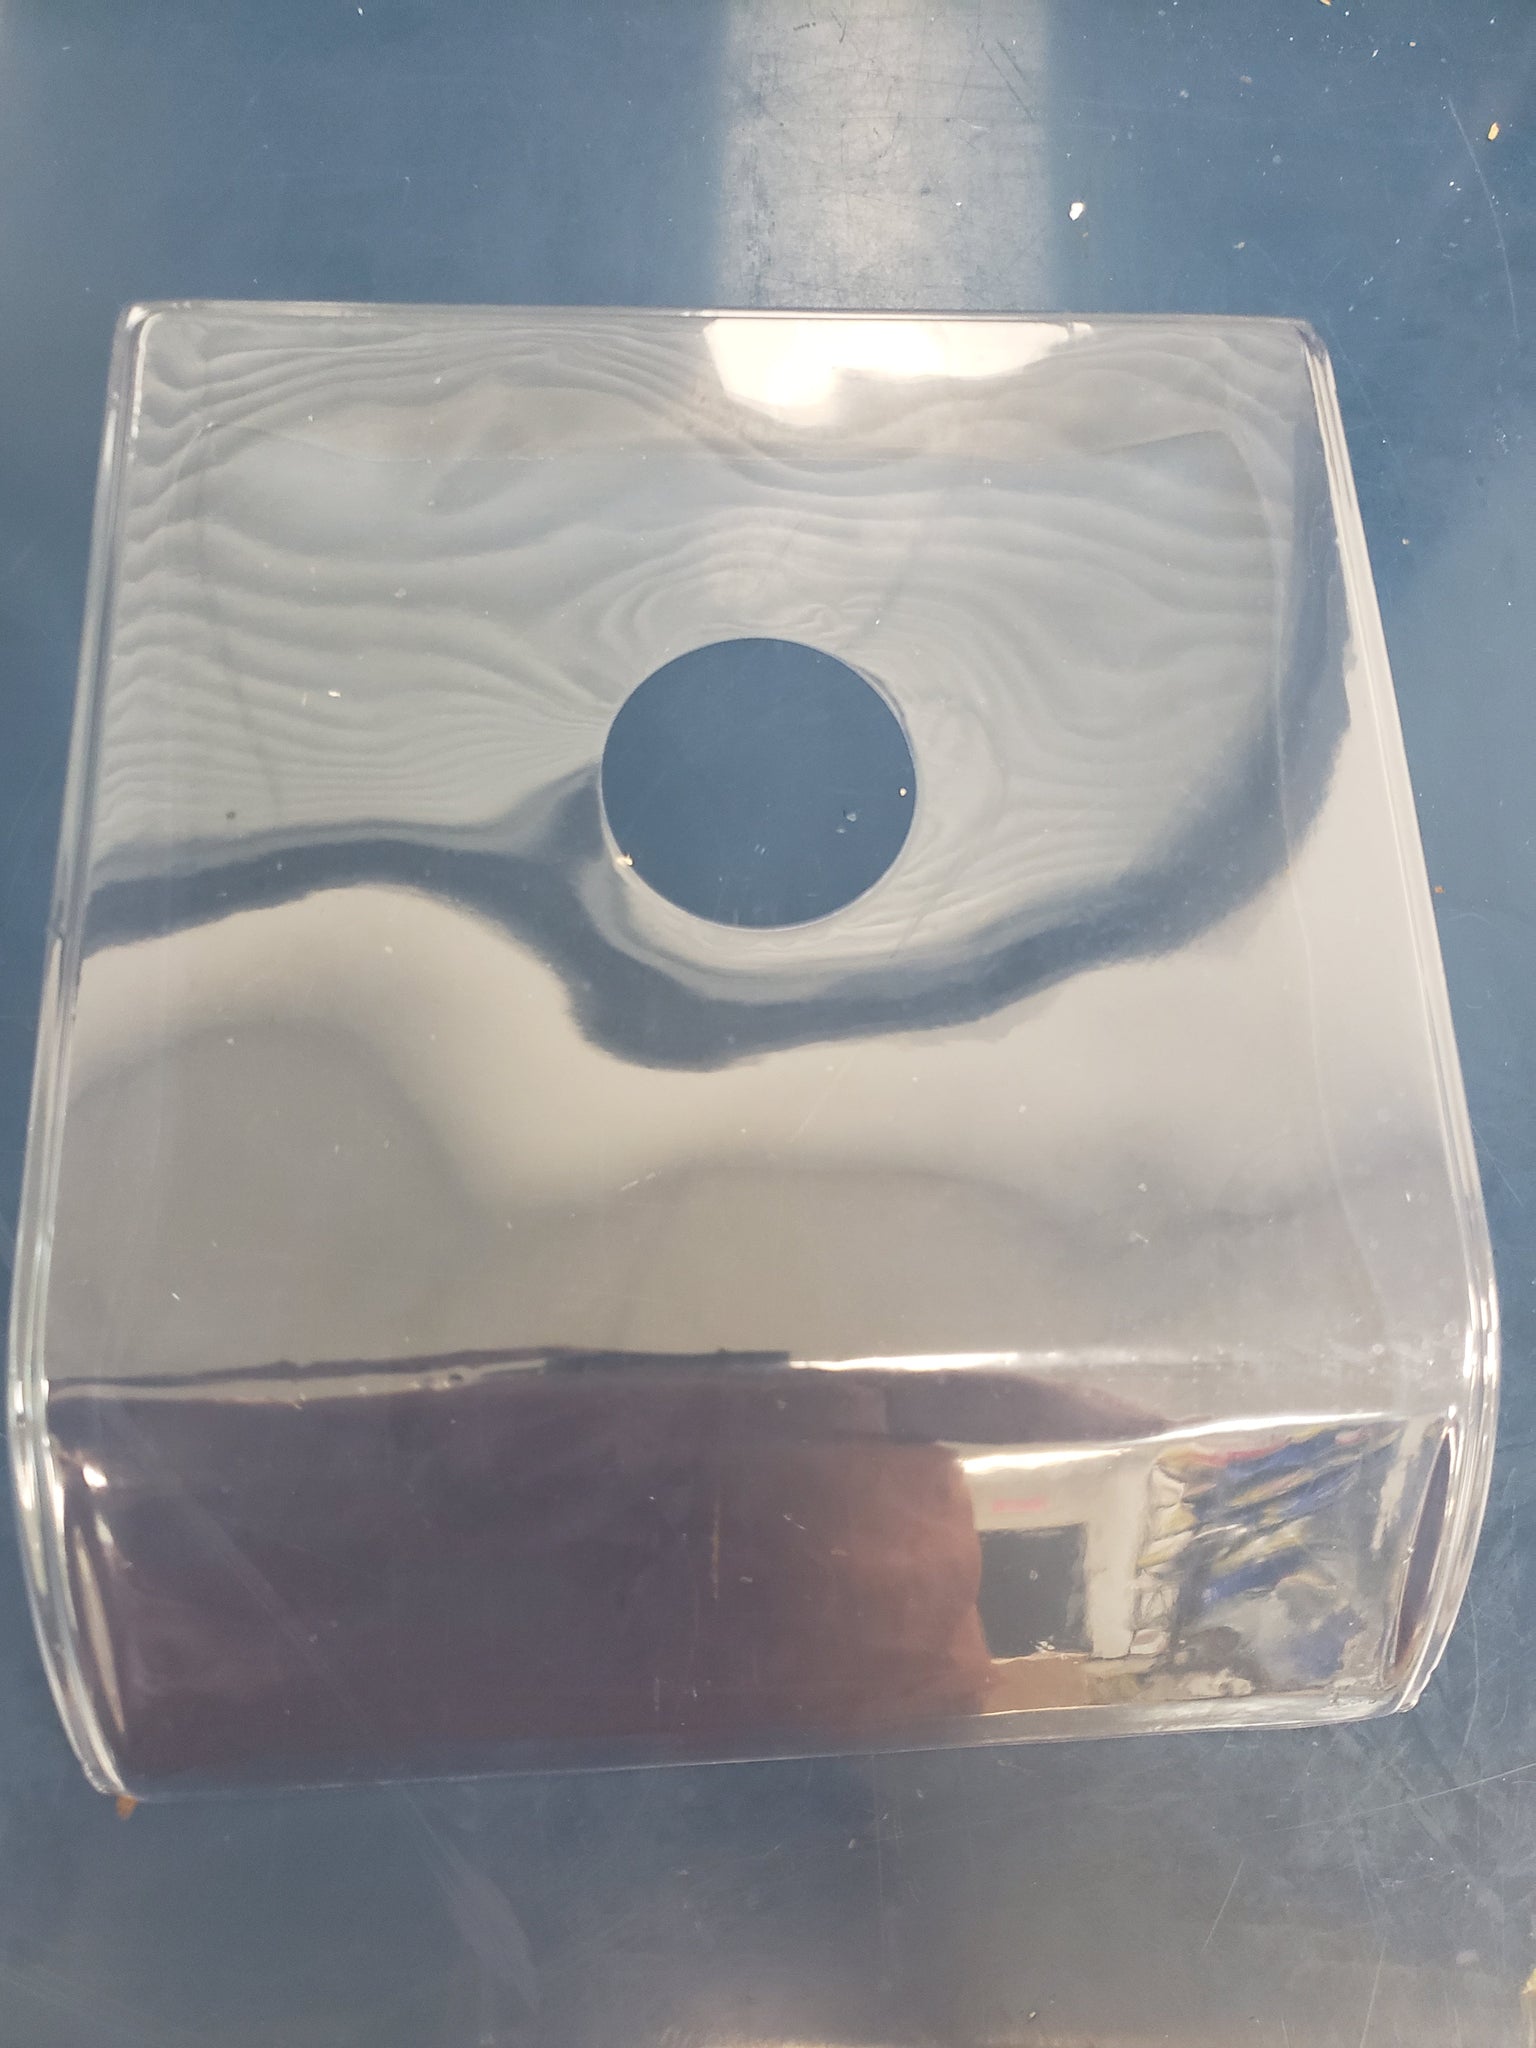 Kilotech - Clear Dust And Water Cover For KPC 2000 / KWS 152 Scales - K861355